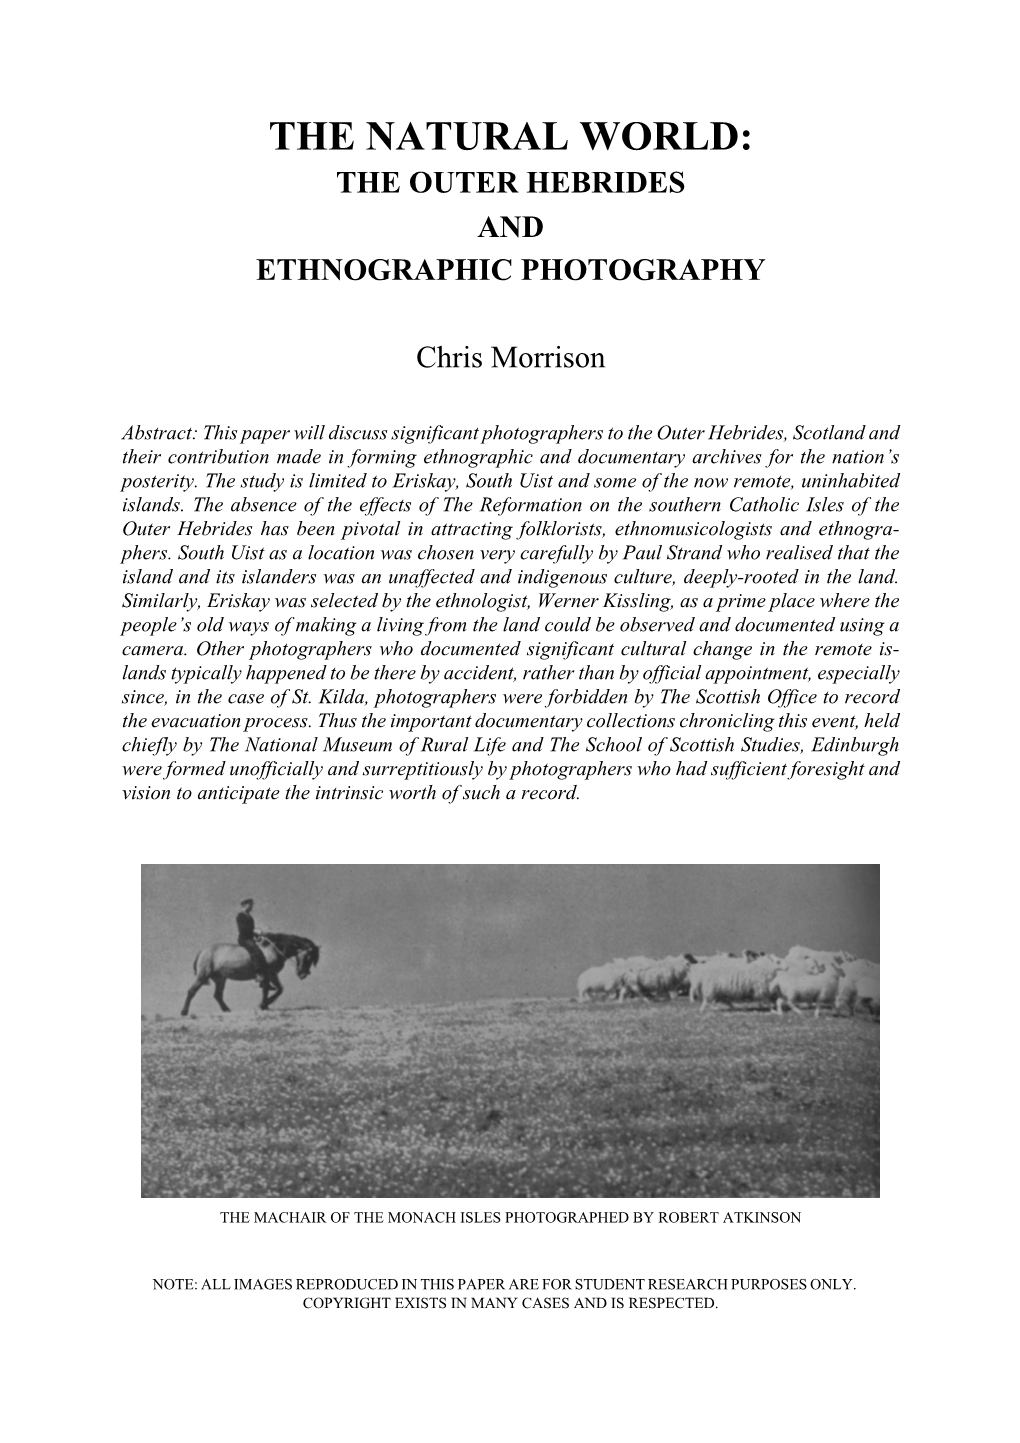 The Natural World: the Outer Hebrides and Ethnographic Photography